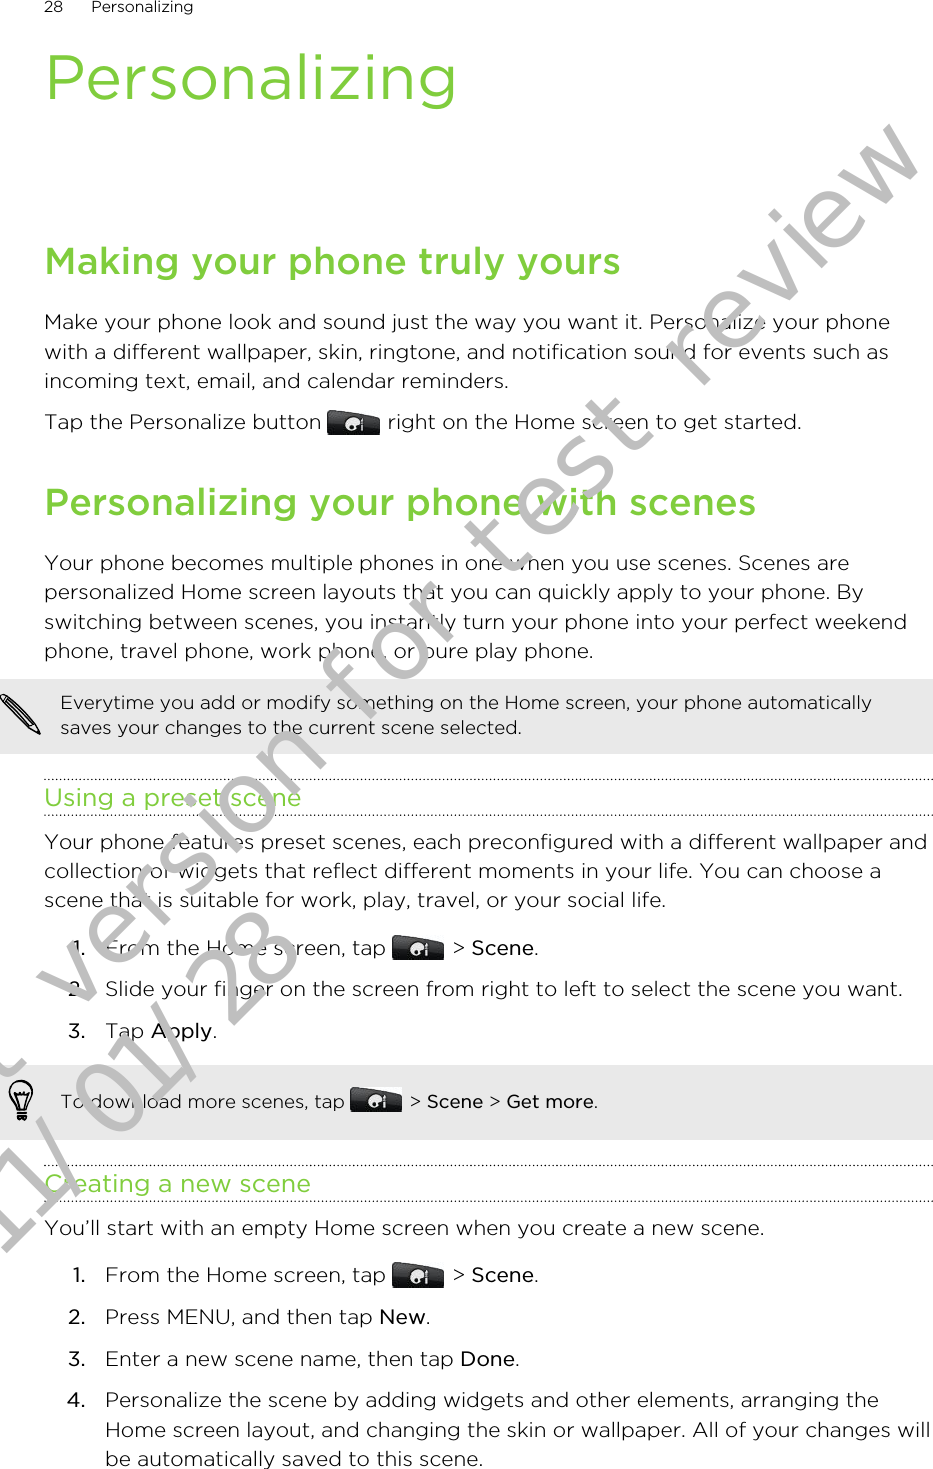 PersonalizingMaking your phone truly yoursMake your phone look and sound just the way you want it. Personalize your phonewith a different wallpaper, skin, ringtone, and notification sound for events such asincoming text, email, and calendar reminders.Tap the Personalize button   right on the Home screen to get started.Personalizing your phone with scenesYour phone becomes multiple phones in one when you use scenes. Scenes arepersonalized Home screen layouts that you can quickly apply to your phone. Byswitching between scenes, you instantly turn your phone into your perfect weekendphone, travel phone, work phone, or pure play phone.Everytime you add or modify something on the Home screen, your phone automaticallysaves your changes to the current scene selected.Using a preset sceneYour phone features preset scenes, each preconfigured with a different wallpaper andcollection of widgets that reflect different moments in your life. You can choose ascene that is suitable for work, play, travel, or your social life.1. From the Home screen, tap   &gt; Scene.2. Slide your finger on the screen from right to left to select the scene you want.3. Tap Apply.To download more scenes, tap   &gt; Scene &gt; Get more.Creating a new sceneYou’ll start with an empty Home screen when you create a new scene.1. From the Home screen, tap   &gt; Scene.2. Press MENU, and then tap New.3. Enter a new scene name, then tap Done.4. Personalize the scene by adding widgets and other elements, arranging theHome screen layout, and changing the skin or wallpaper. All of your changes willbe automatically saved to this scene.28 PersonalizingDraft version for test review 2011/01/28 